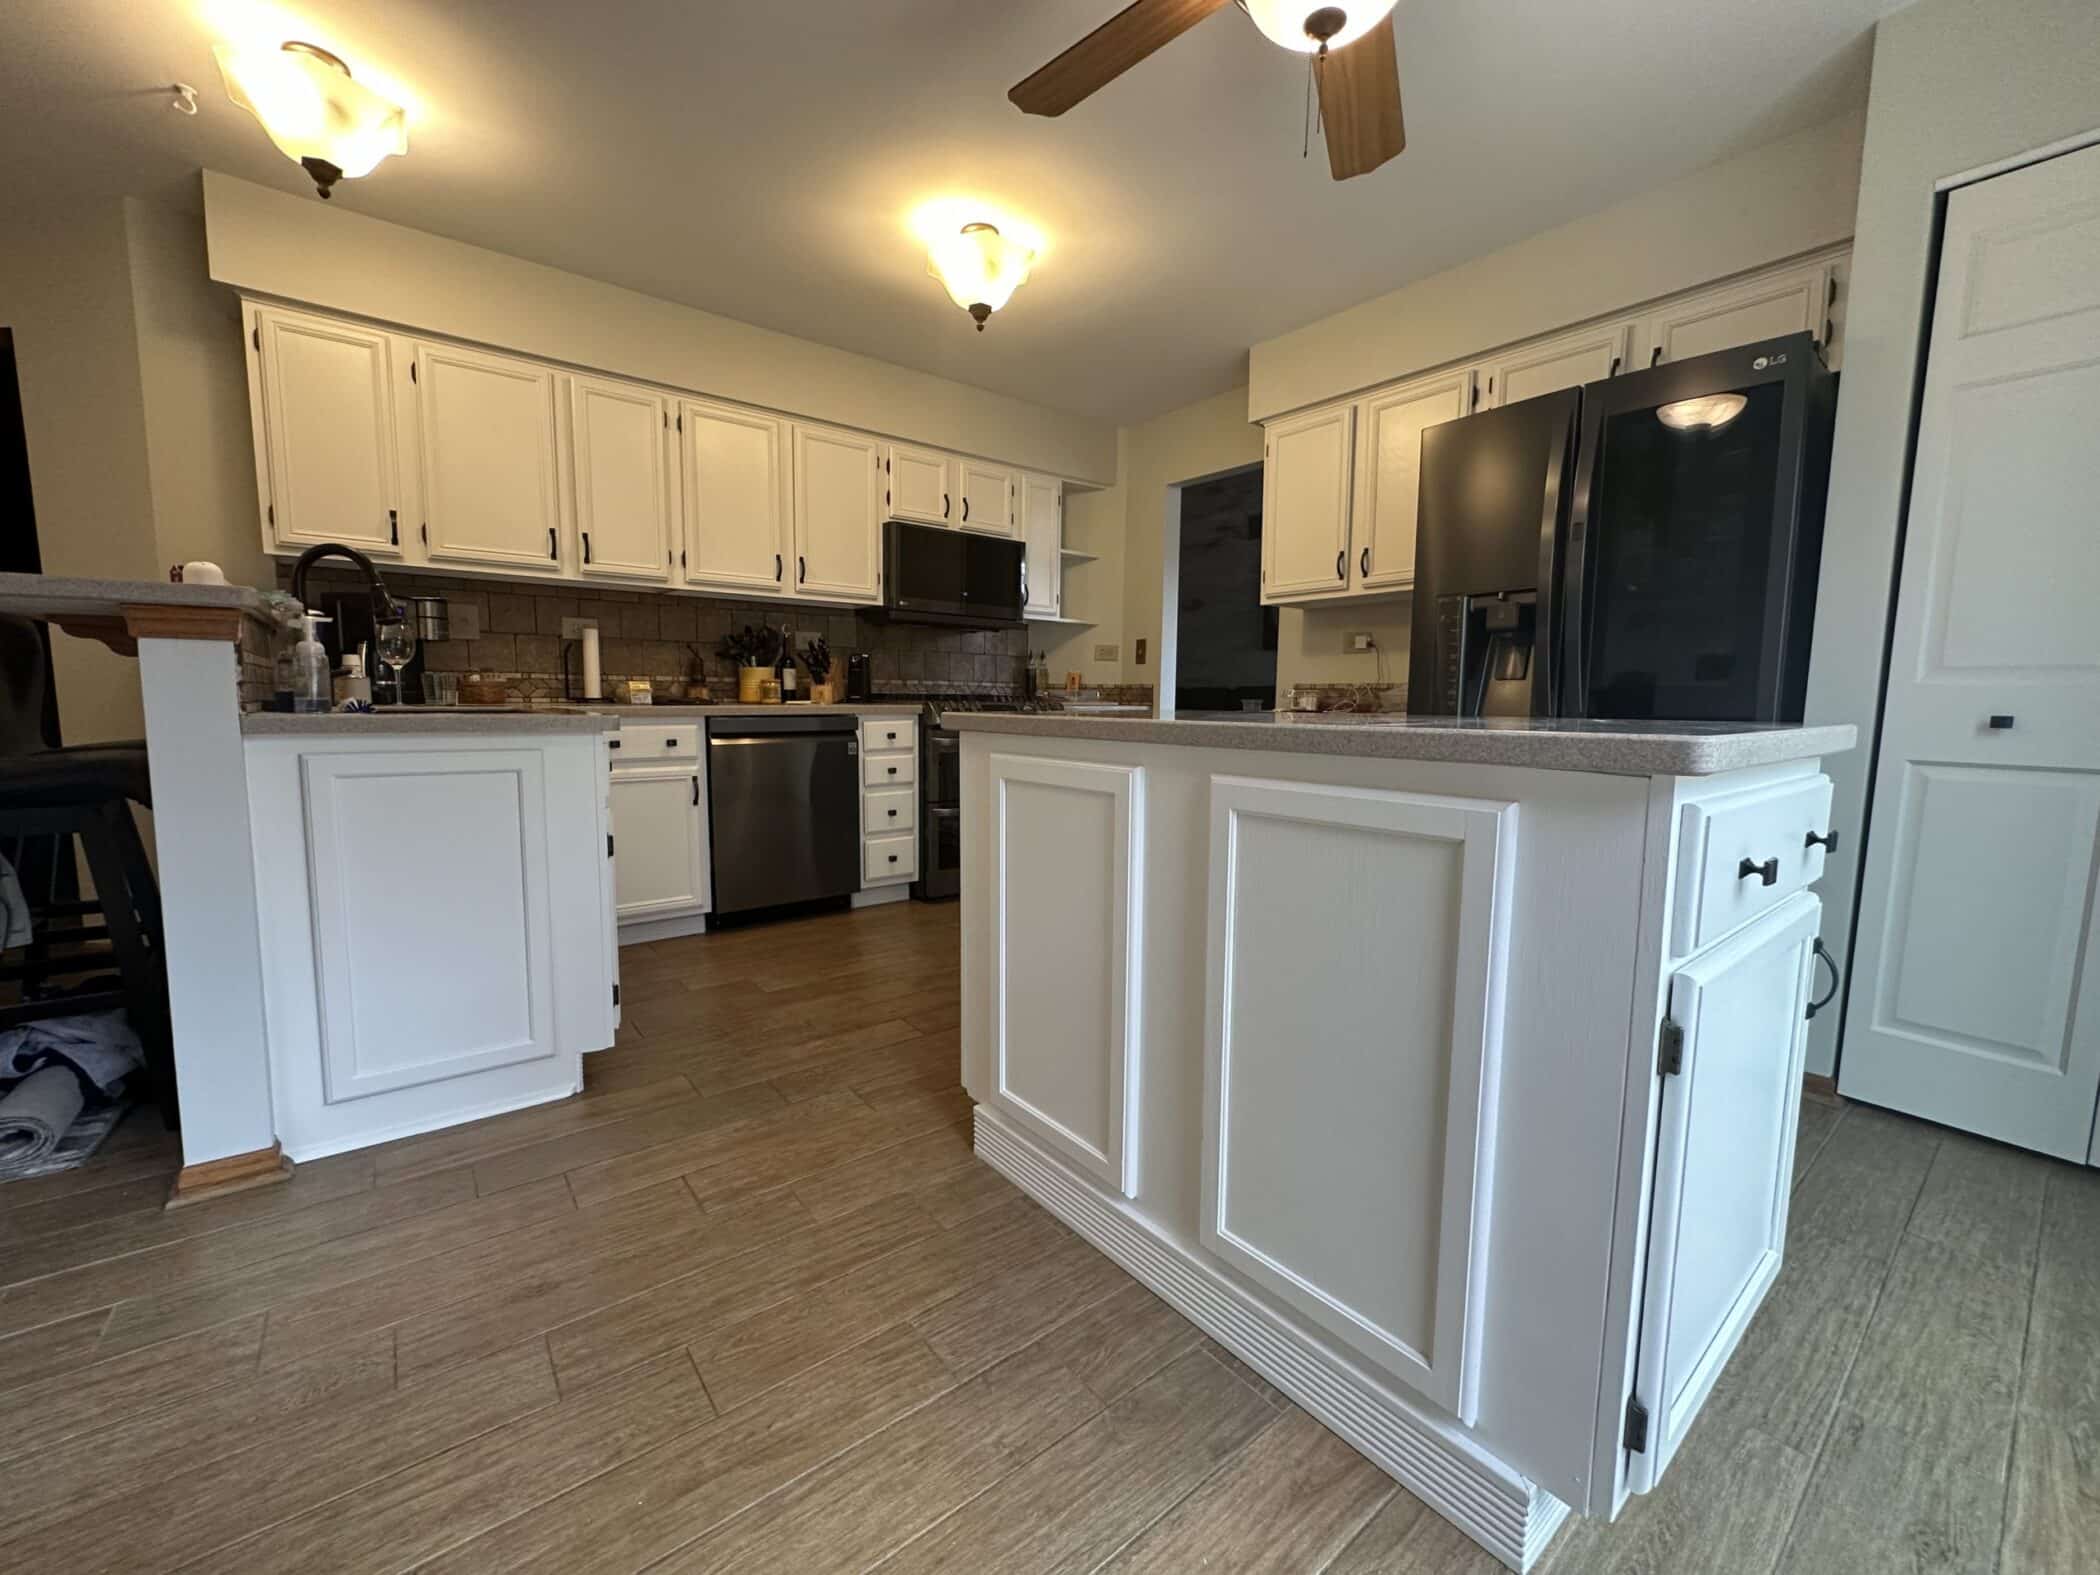 White painted island cabinets